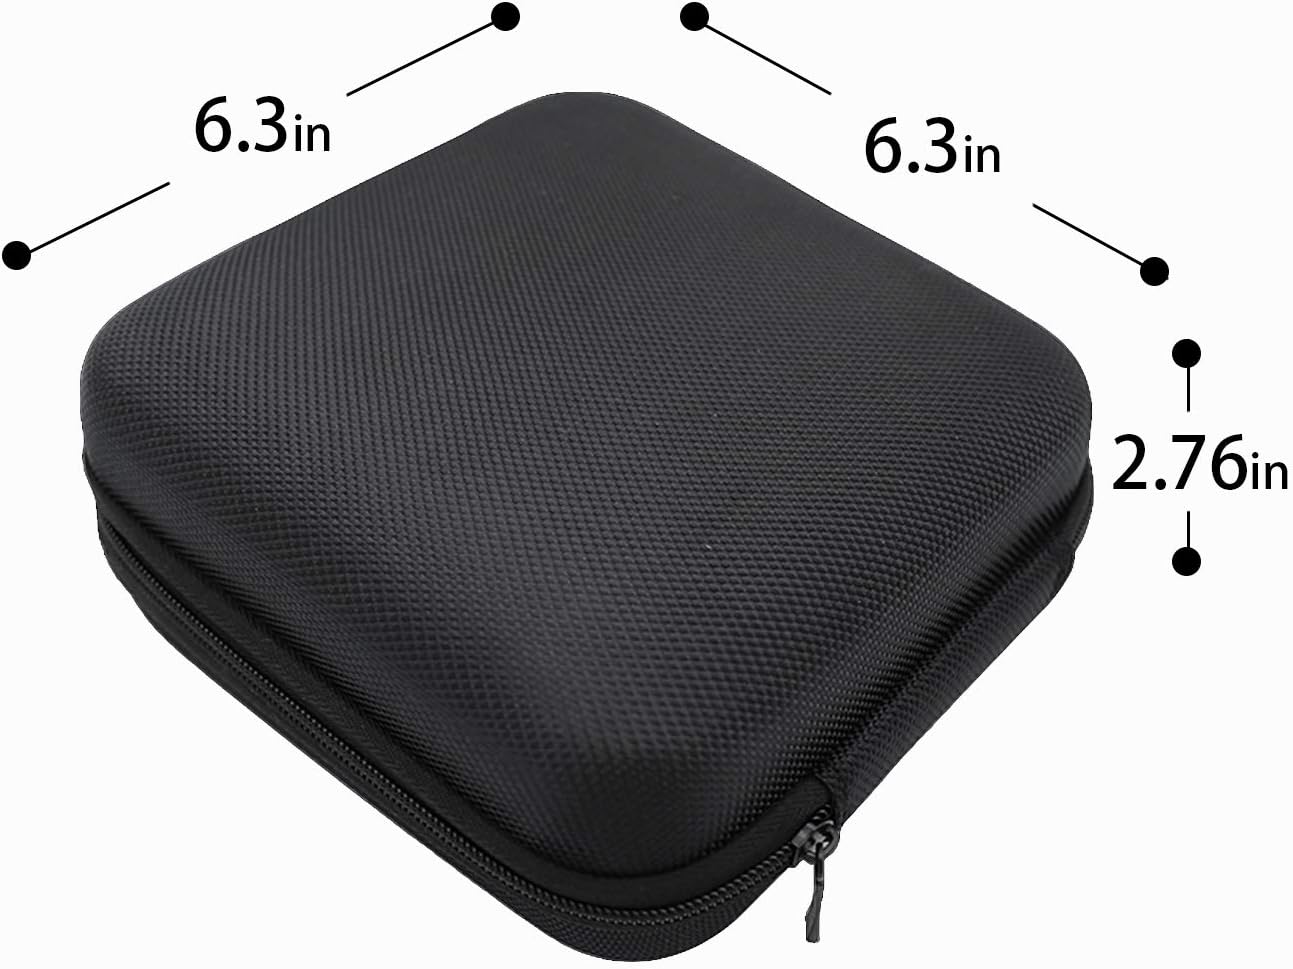 Ricank Hard Travel Case Review